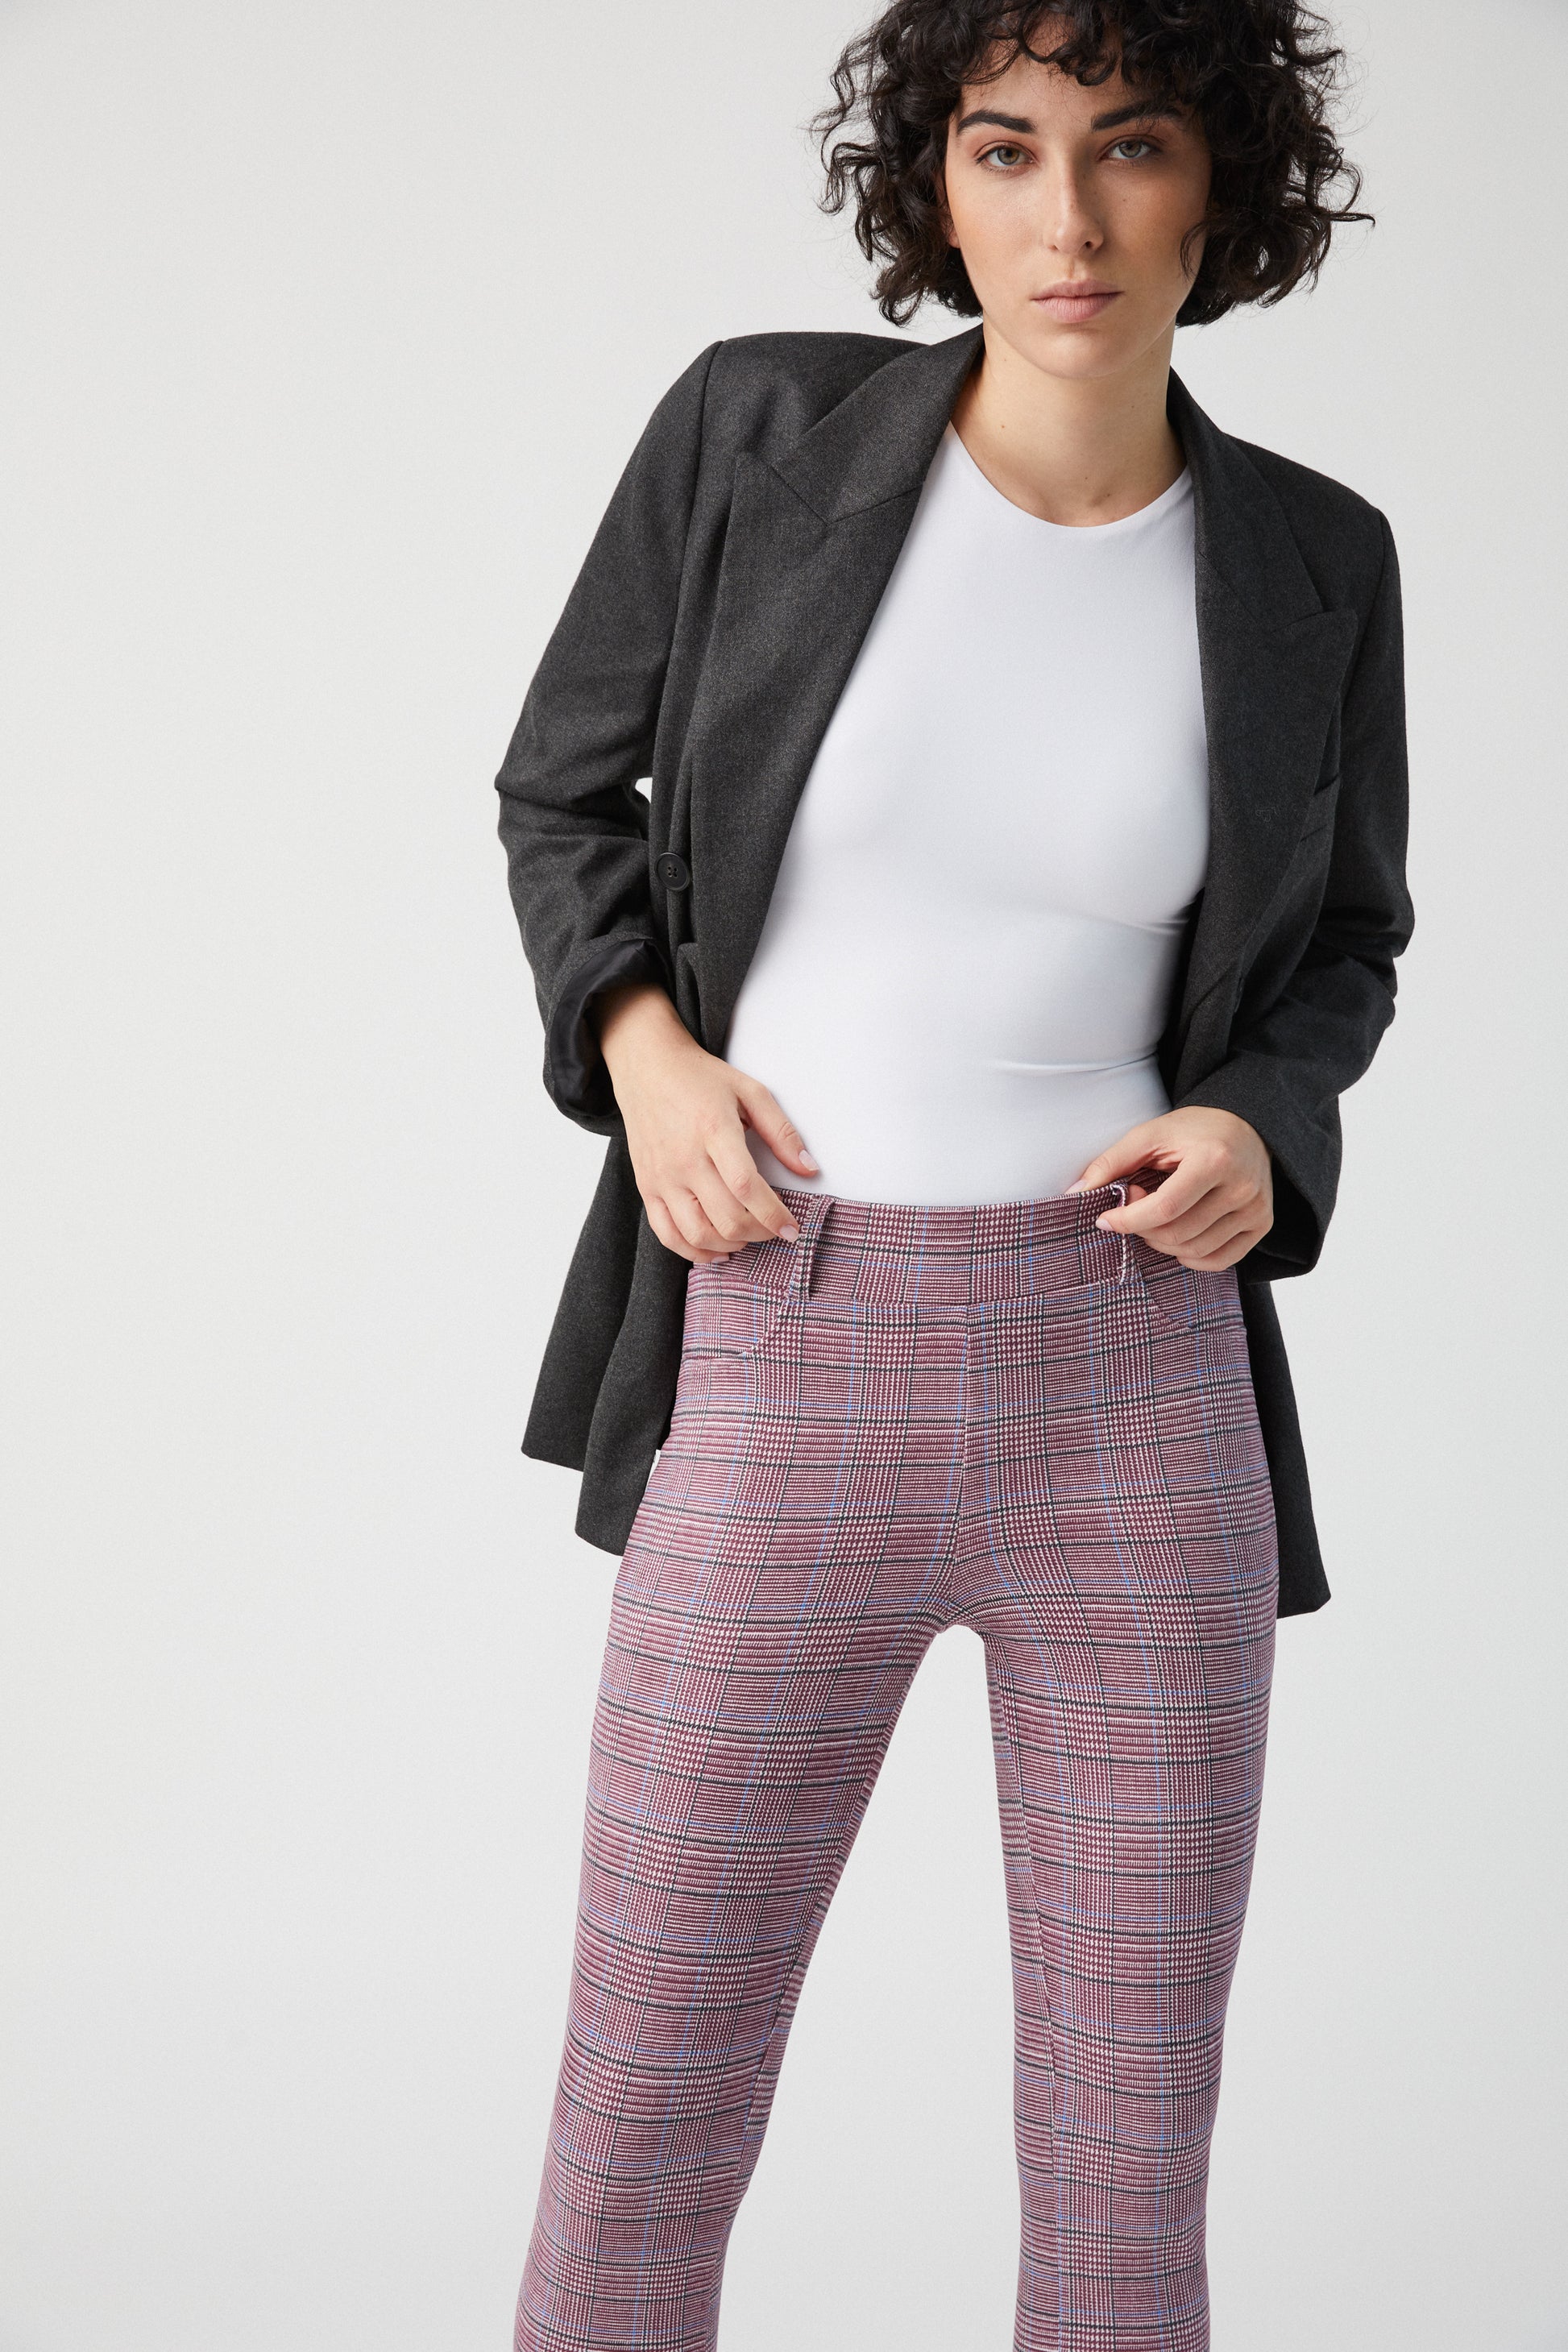 Ysabel Mora 70275 Pink Check Leggings - Soft white slimming trouser leggings (treggings) with an all over check print in plum (combined with white it looks pink), black and a small stripe of light blue, belt loops and faux front pocket top stitching.